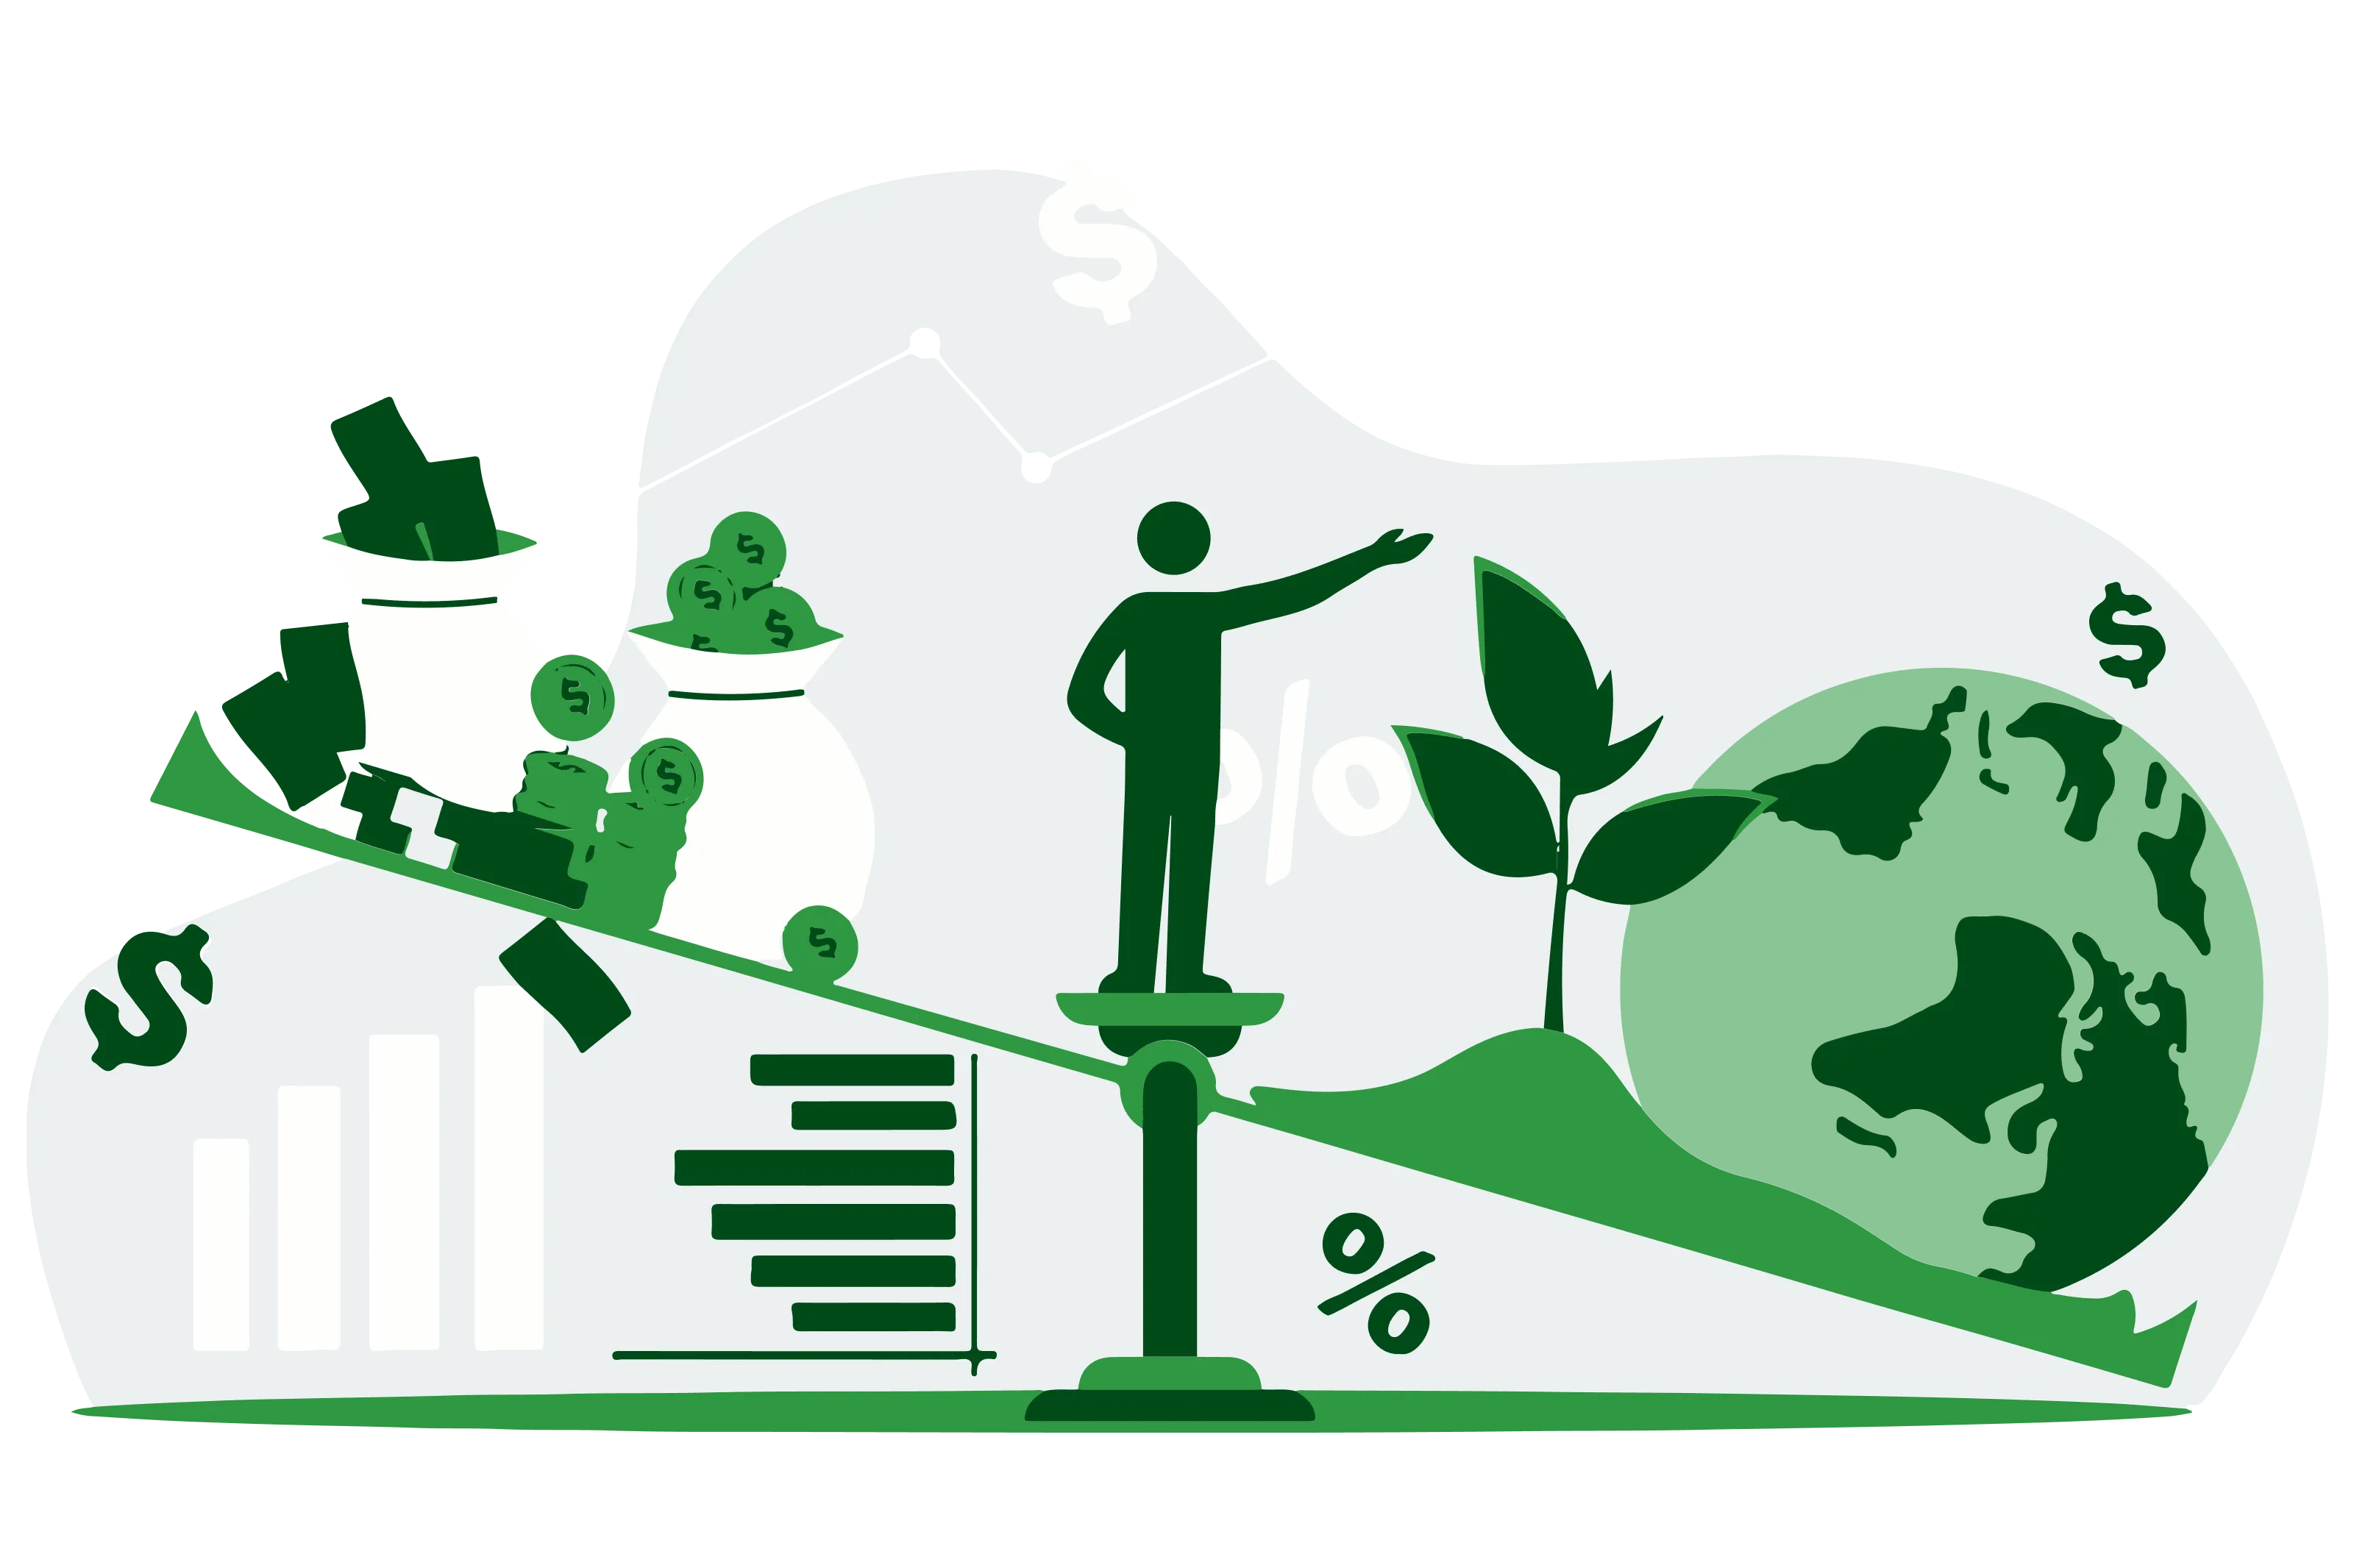 An image illustrating economic sustainability. The visual shows a balance weighing scale, with a green earth symbol on one side and various economic symbols, such as dollar signs and graphs, on the other side. The image highlights the concept that economic sustainability is about achieving a balance between economic growth and environmental protection. The image suggests that economic sustainability requires us to consider the long-term impacts of economic decisions and to prioritize investments that benefit both the economy and the environment. The image serves as a reminder that economic sustainability is not just about making money, but also about creating a stable and prosperous future for all.